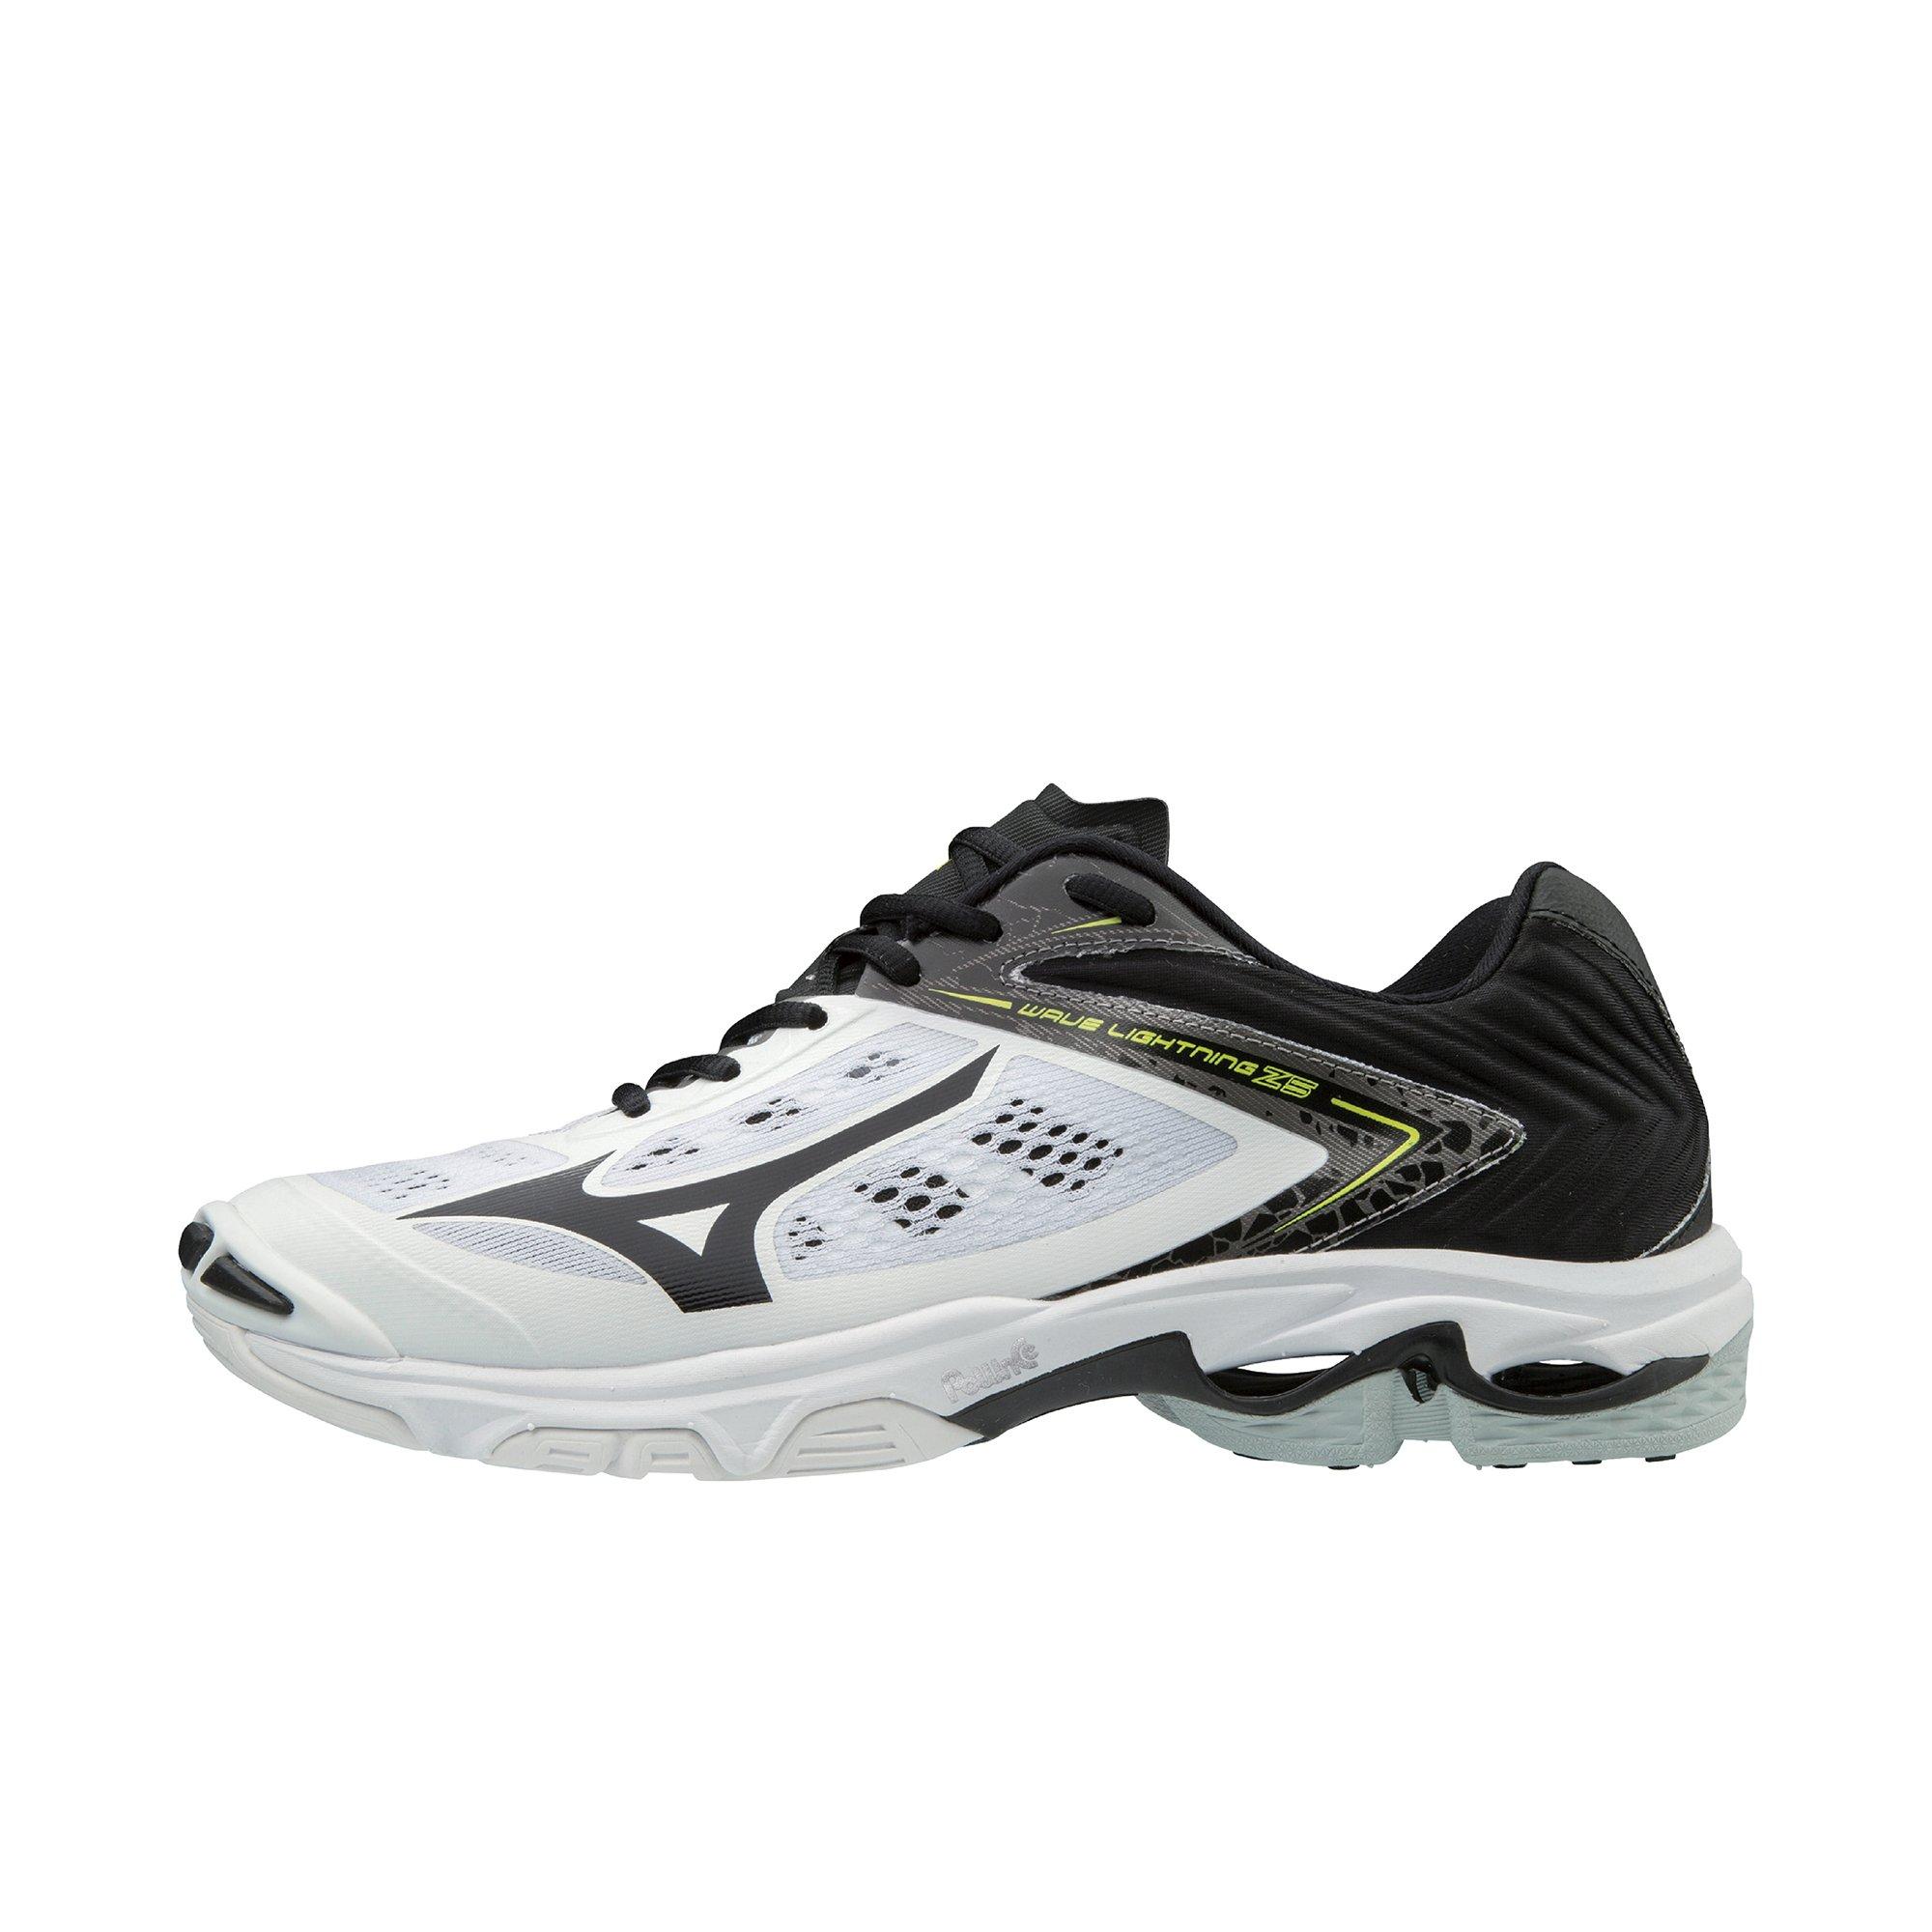 mizuno volleyball shoes online shopping